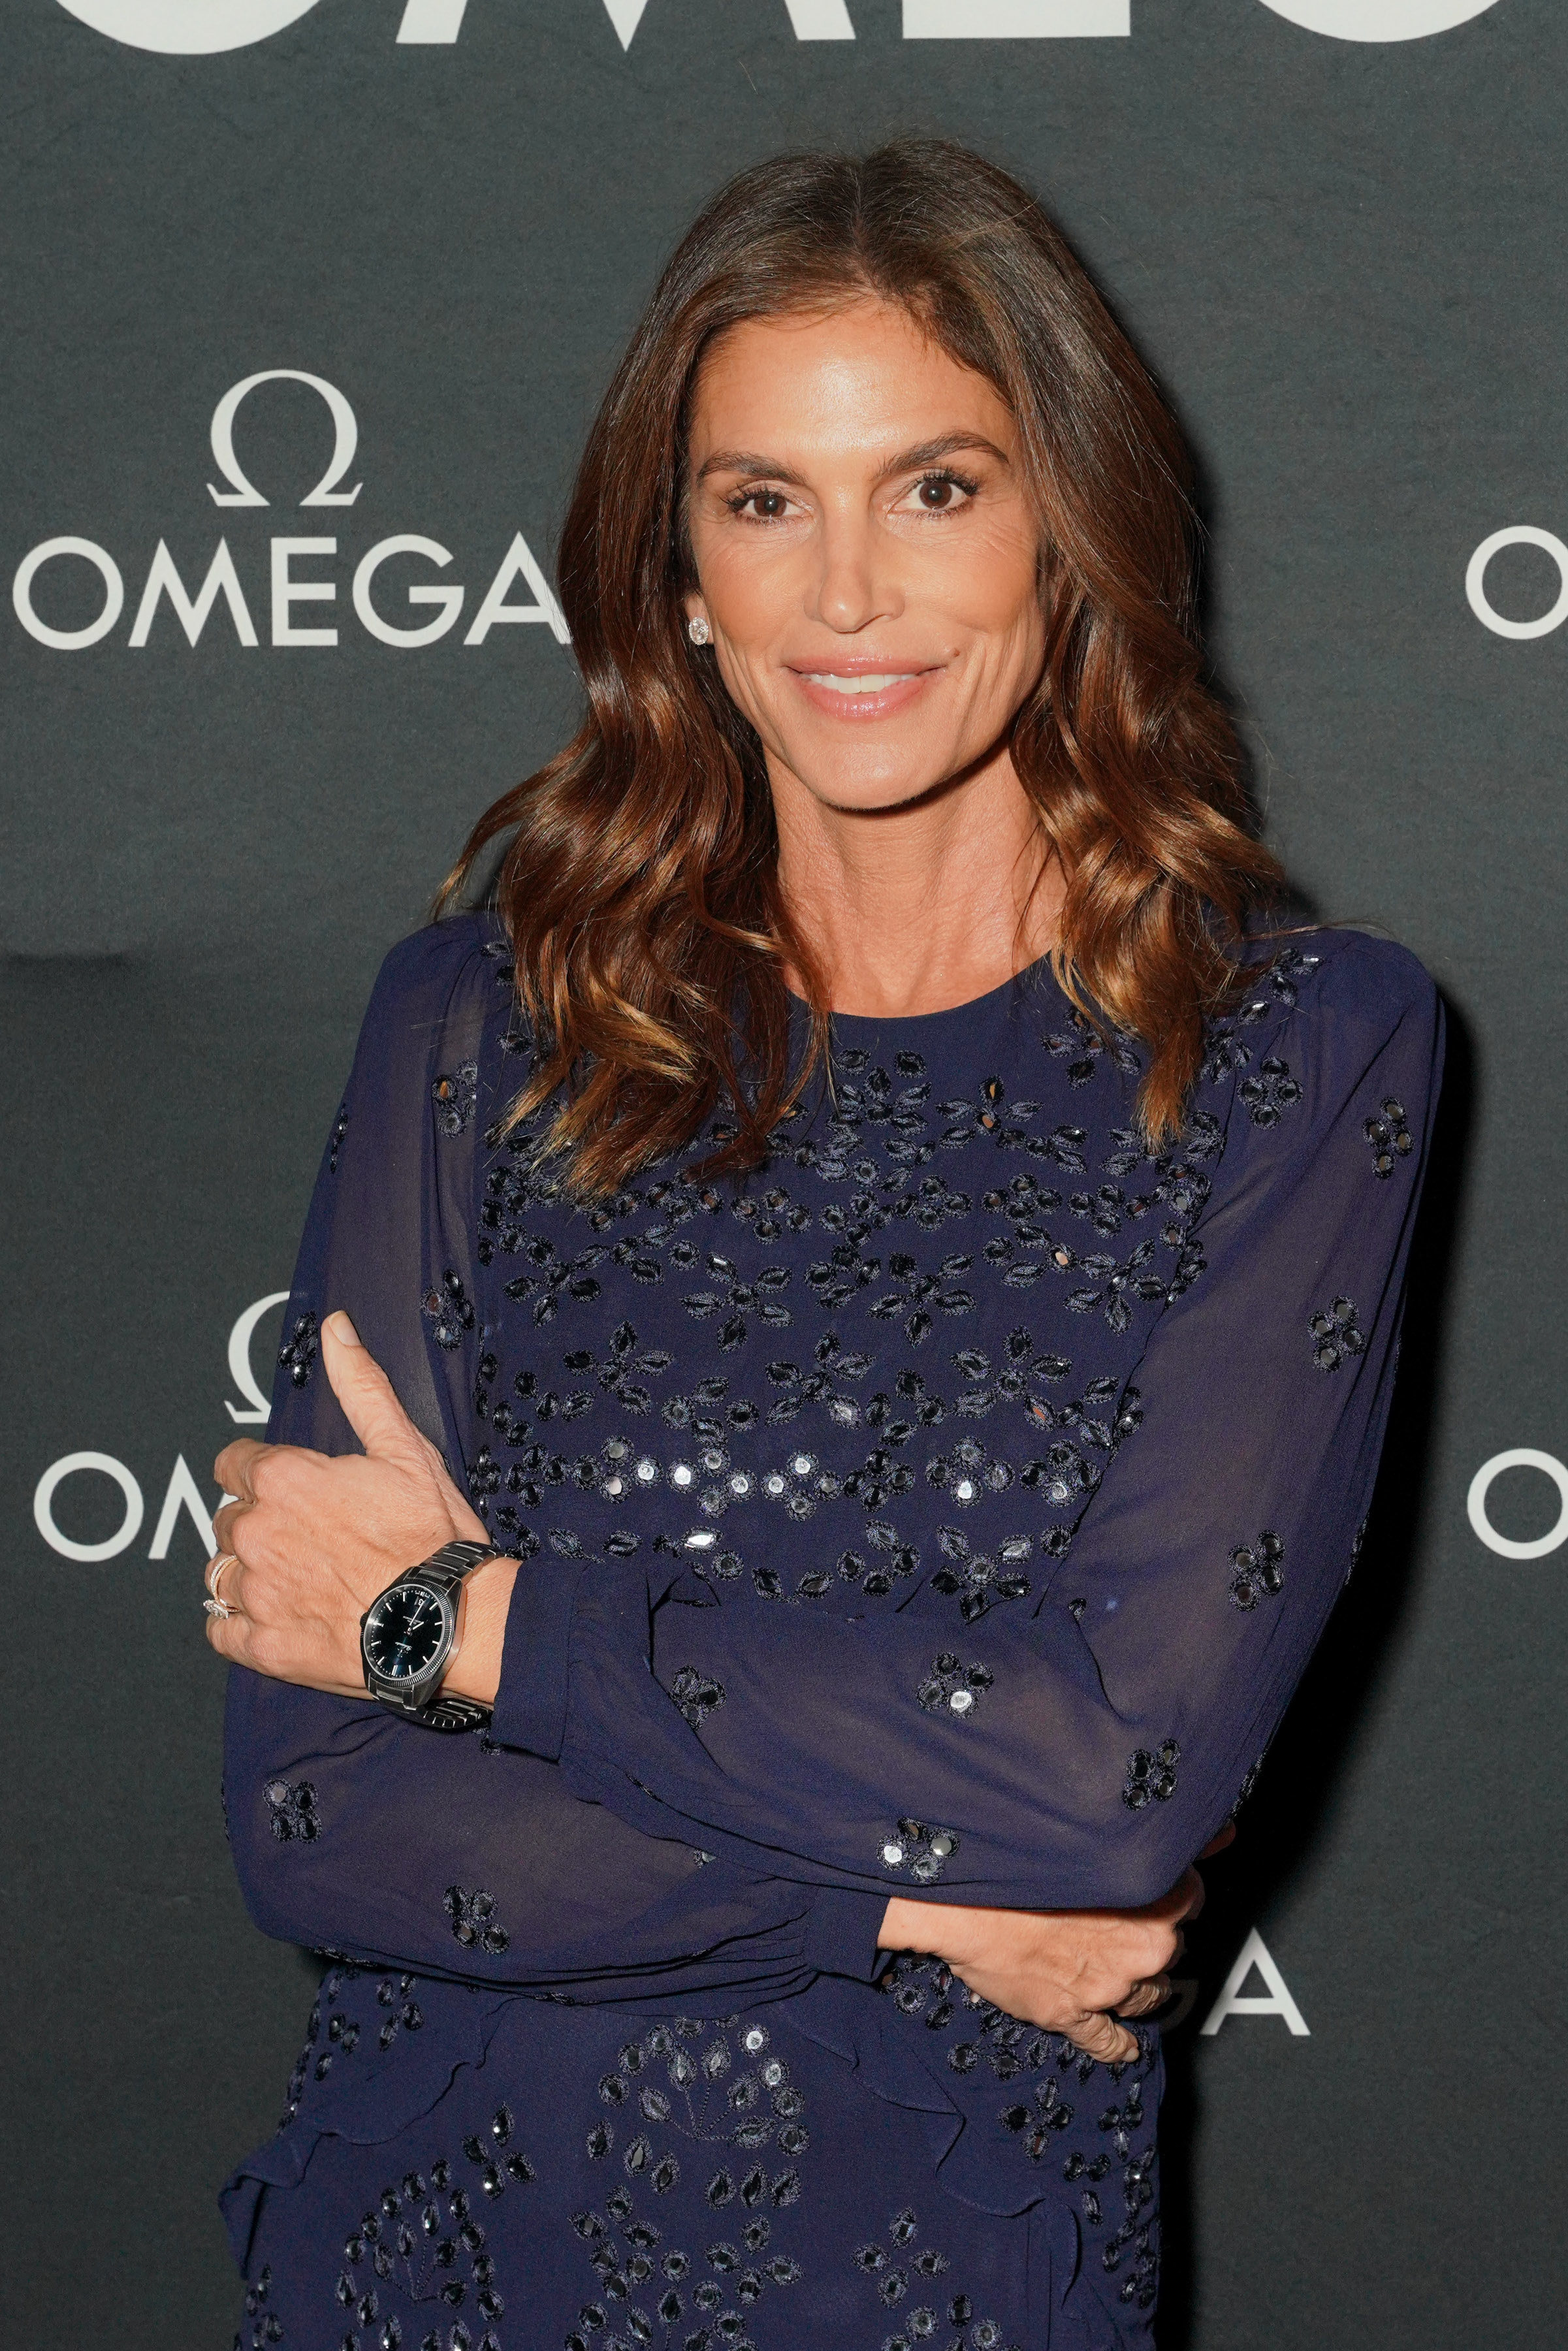 Cindy Crawford poses on the red carpet in a navy blue long-sleeve sheer dress